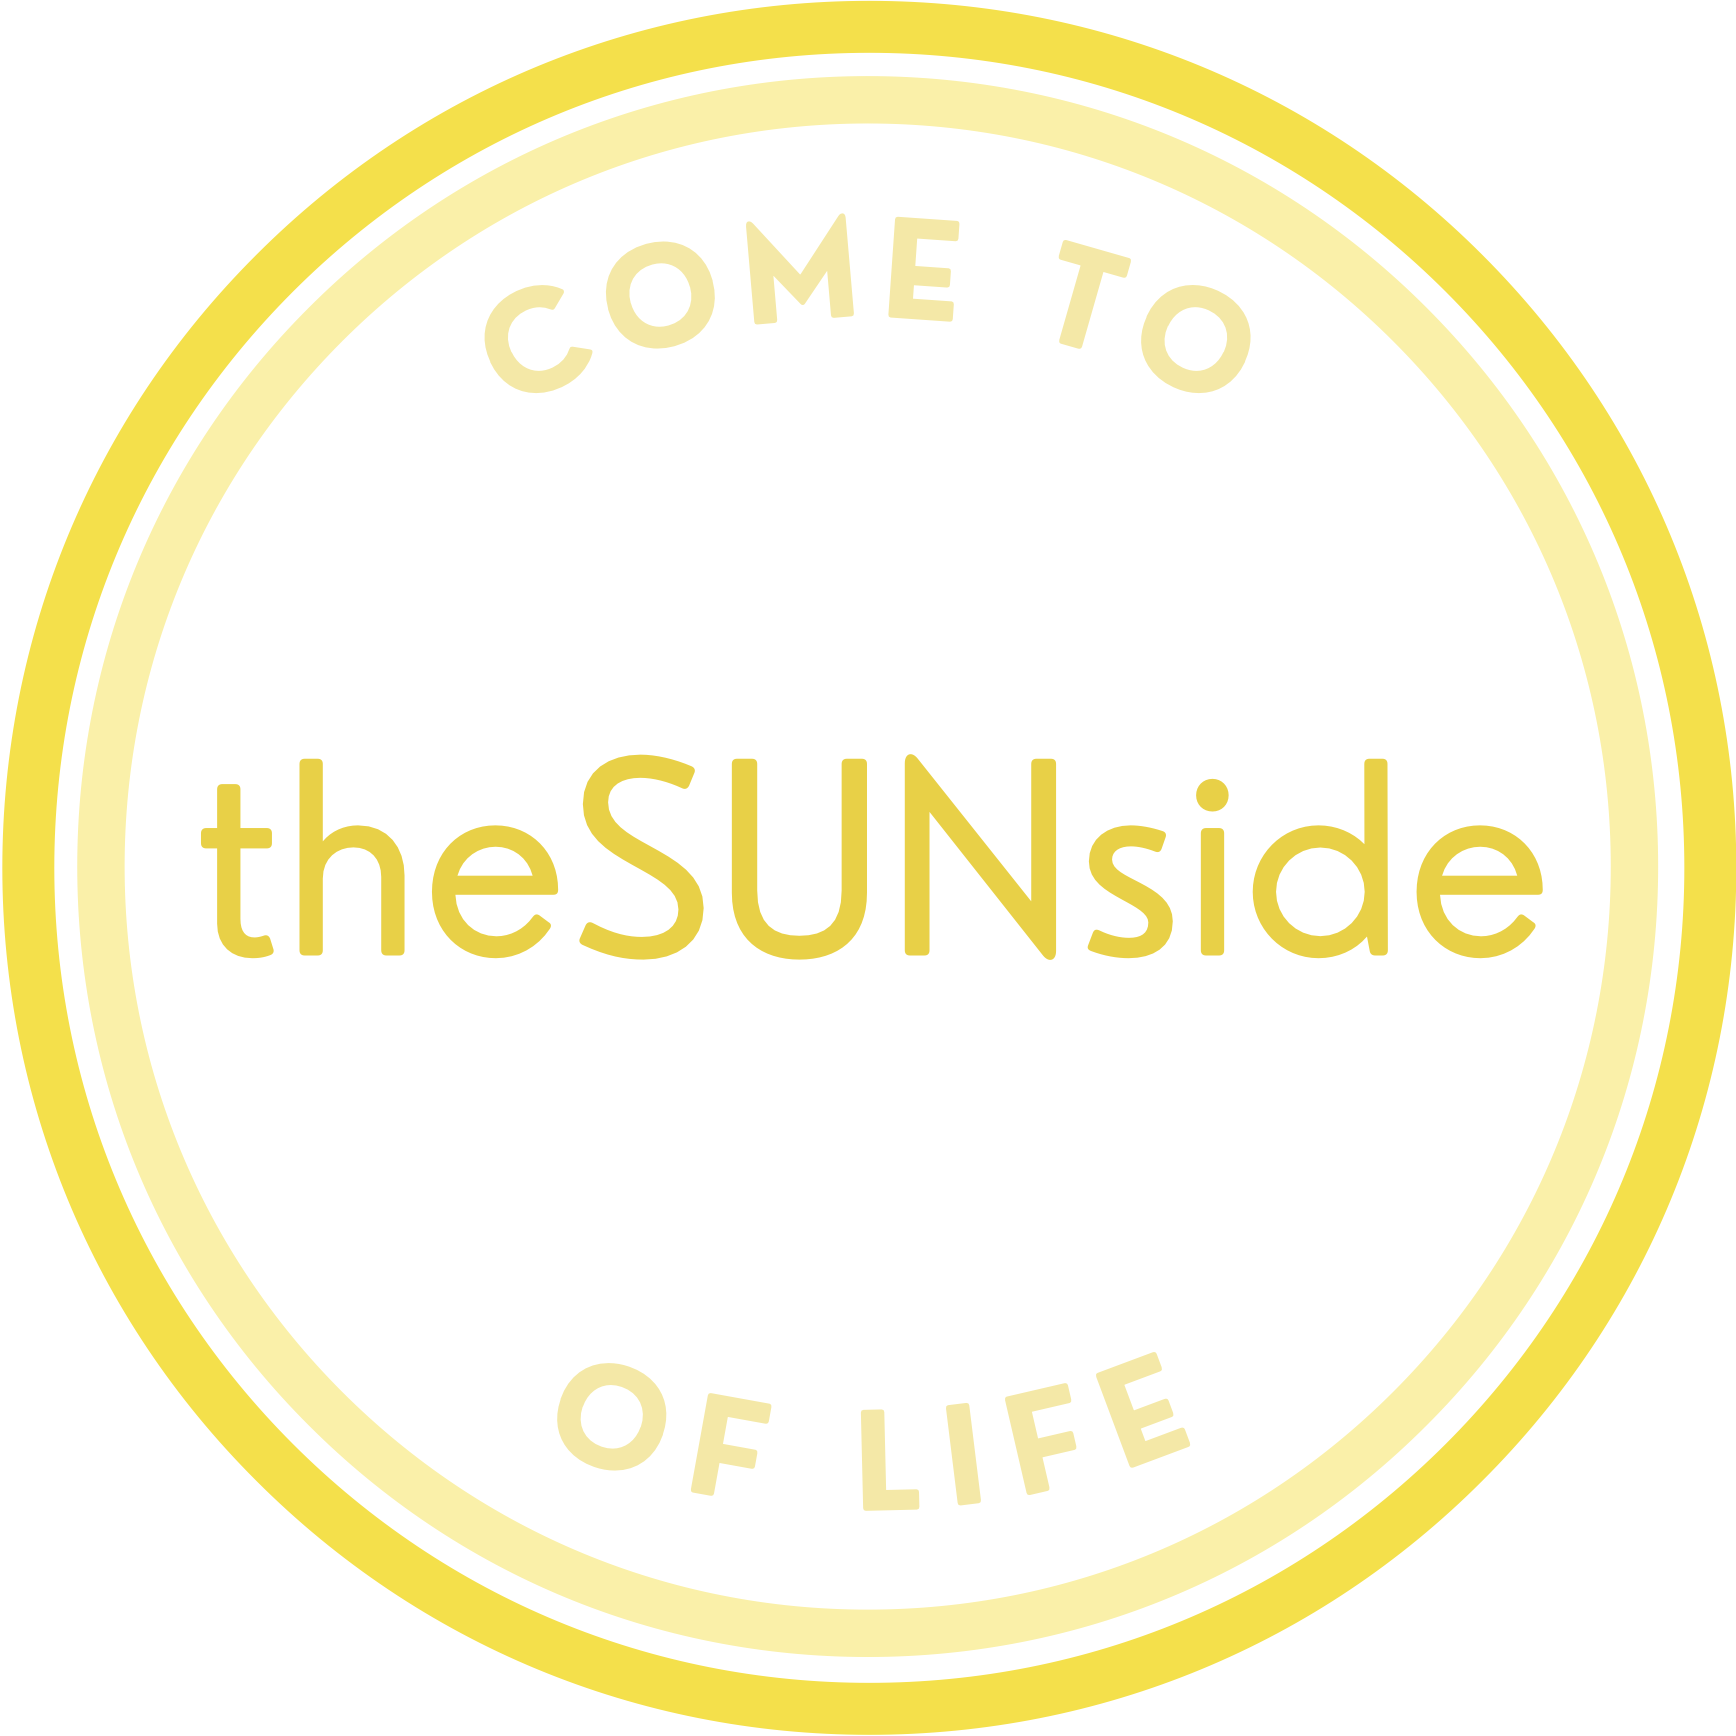 Welcome at the SUNside OF YOUR LIFE